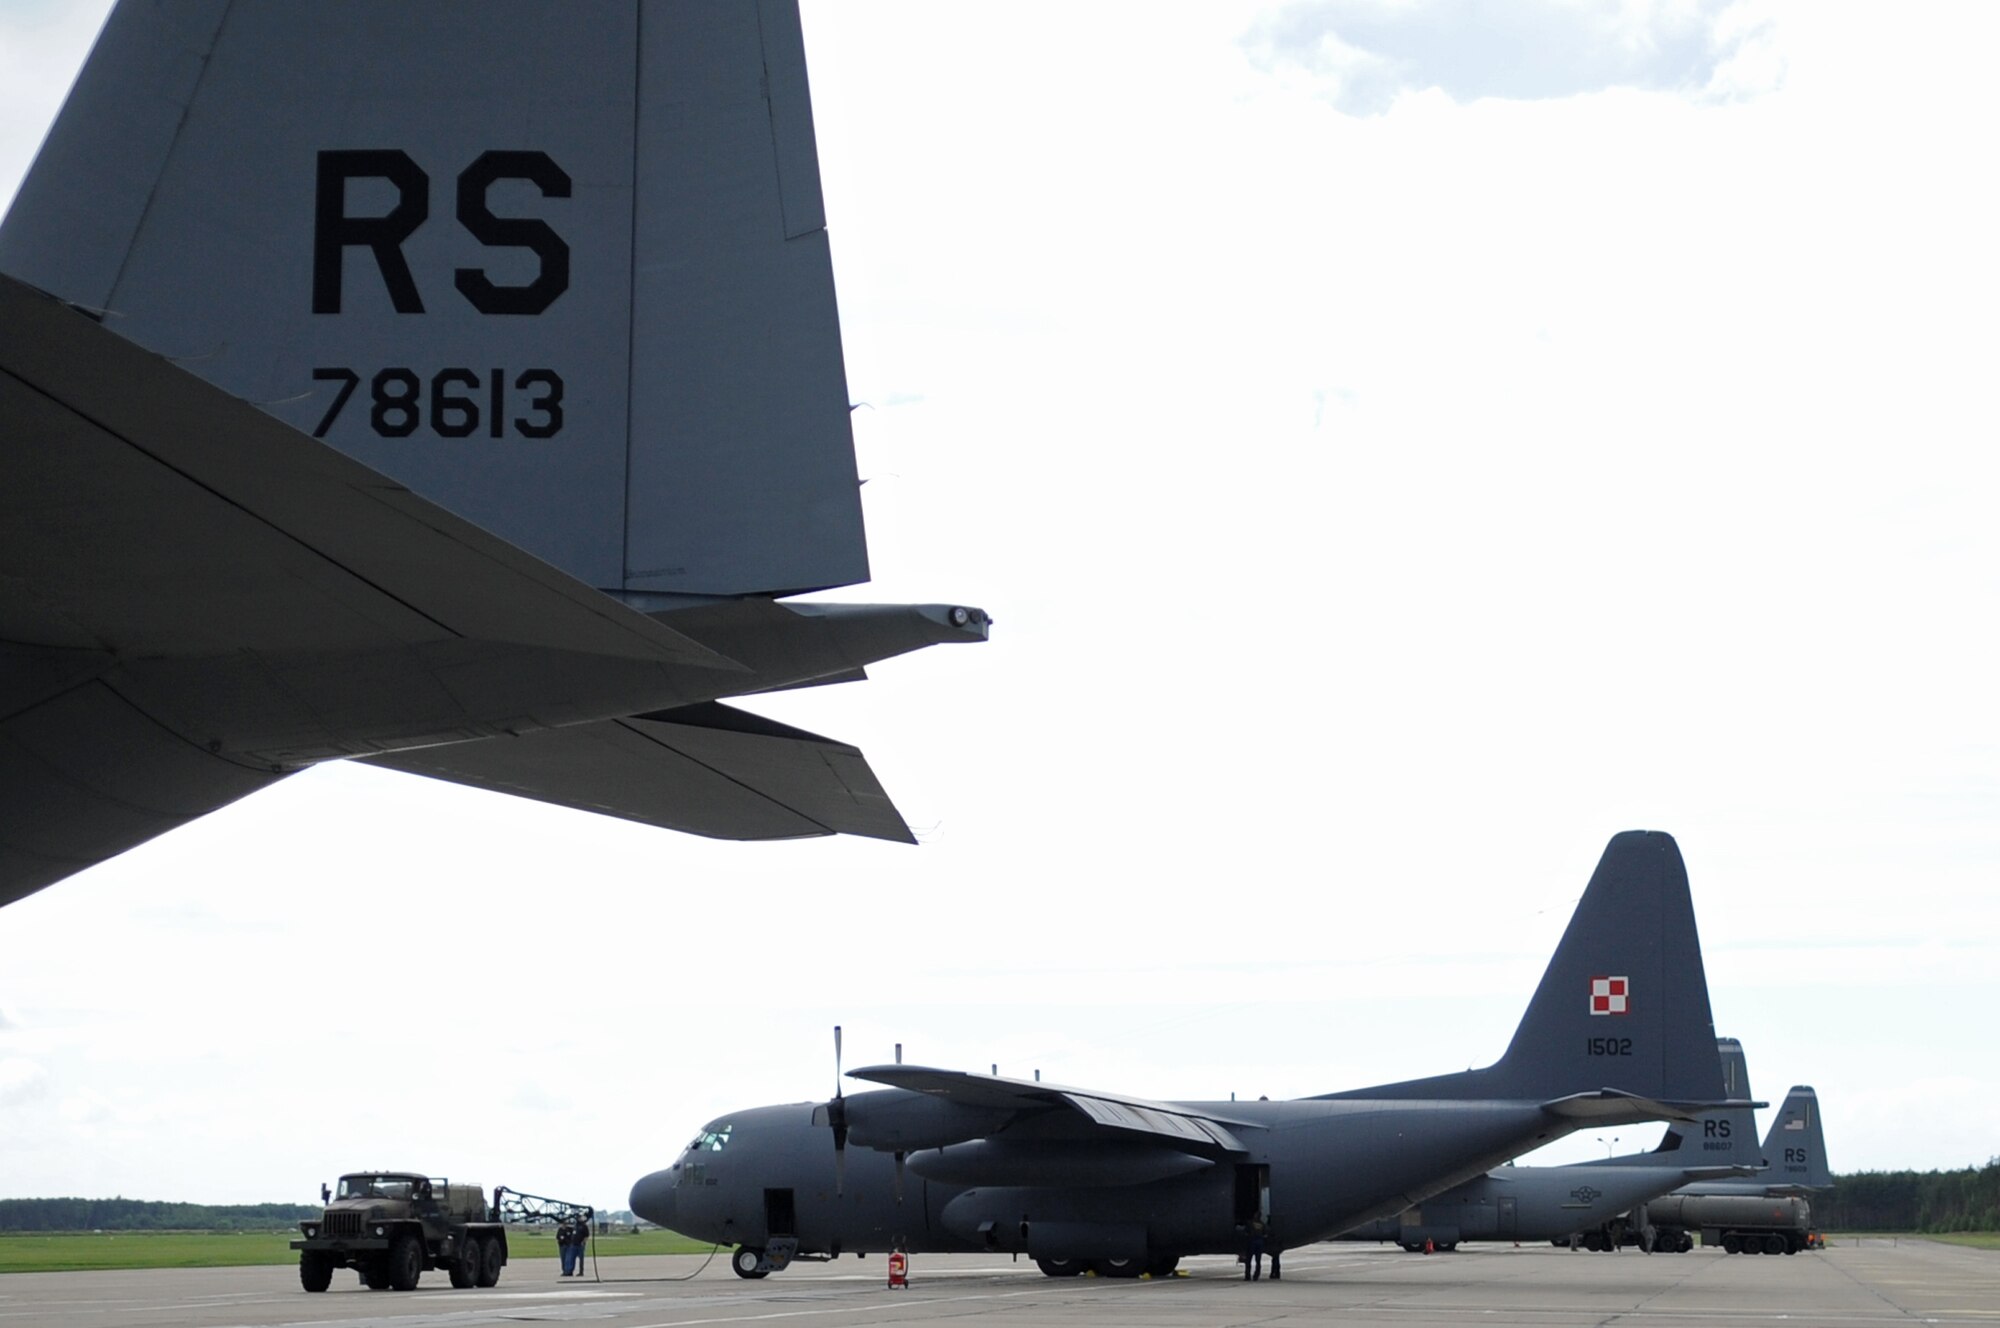 A U.S. Air Force C-130J and a Poland Air Force C-130E park on the flightline during a visit on Powidz Air Base, Poland, June 21, 2010. The purpose of General Dillon's visit to Poland was to sign the letter designating the 86th AW and the 3rd Airlift Wing as 'sister wings' and to build partnerships. (U.S. Air Force photo by Airman 1st Class Grovert Fuentes-Contreras)(Released)